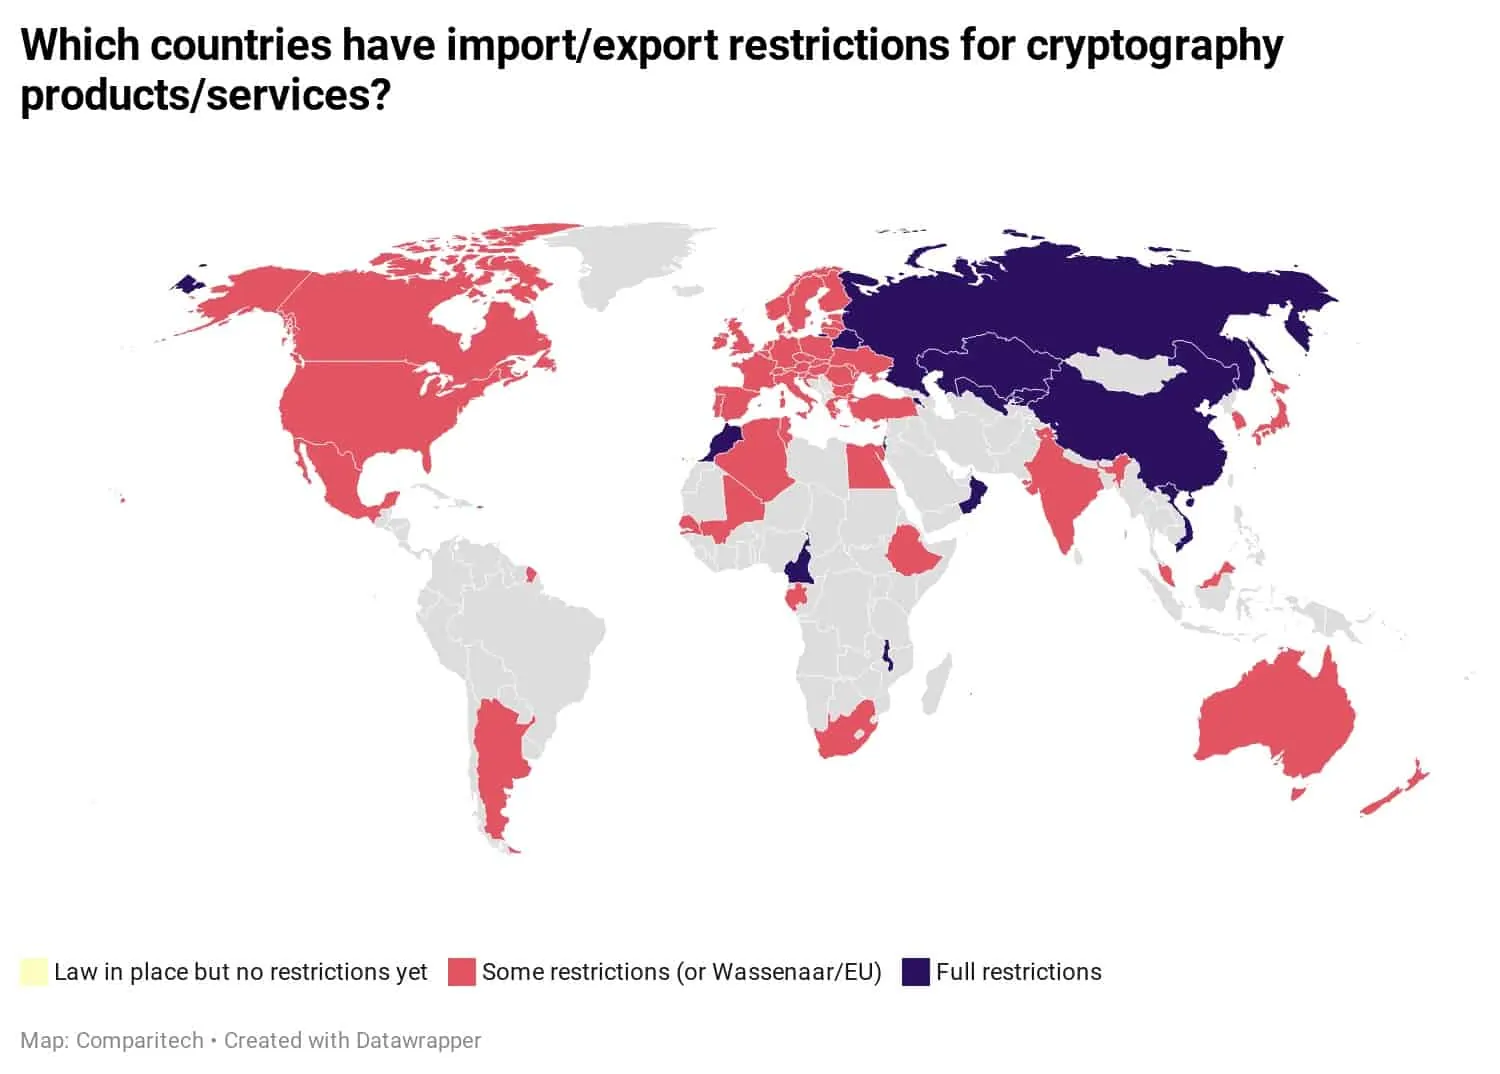 Cryptography import and export restrictions worldwide